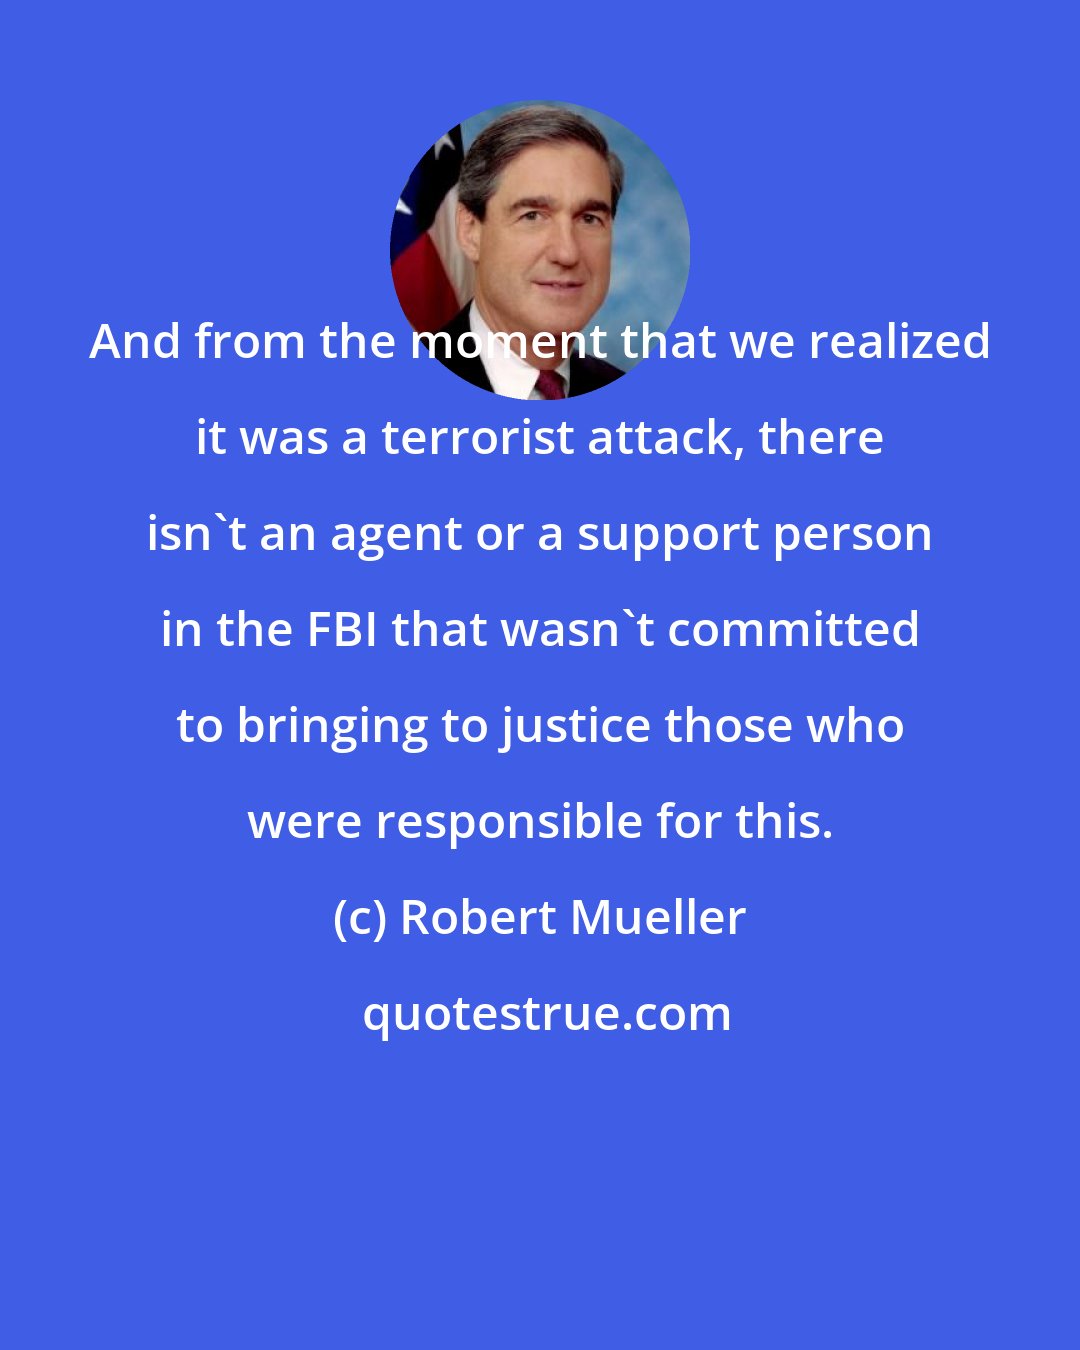 Robert Mueller: And from the moment that we realized it was a terrorist attack, there isn't an agent or a support person in the FBI that wasn't committed to bringing to justice those who were responsible for this.